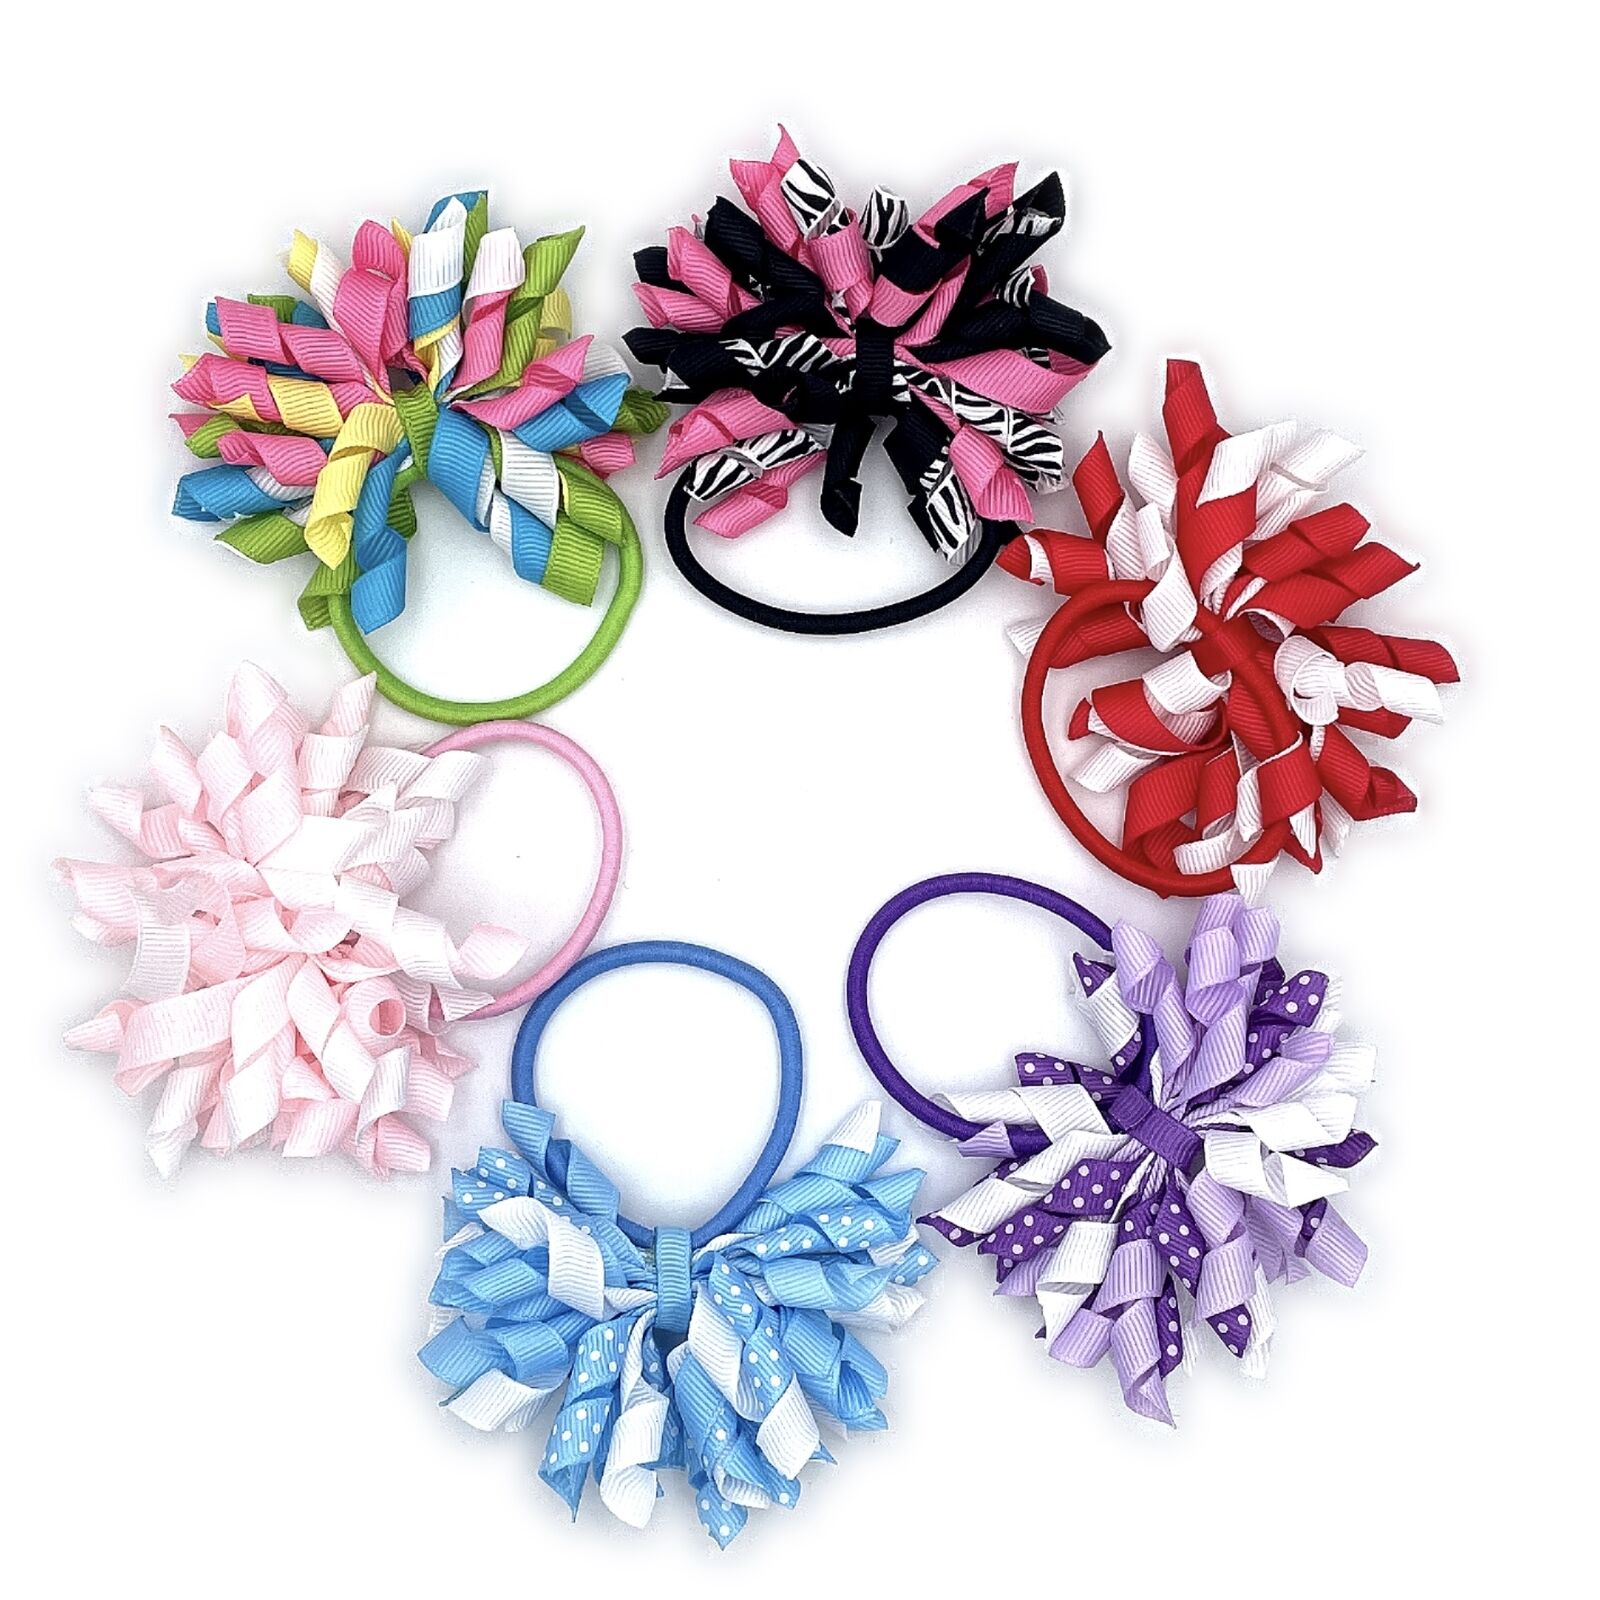 6pcs coker koker hair Bows for Girls baby kids clip Hair Accessories wholesale Unbranded